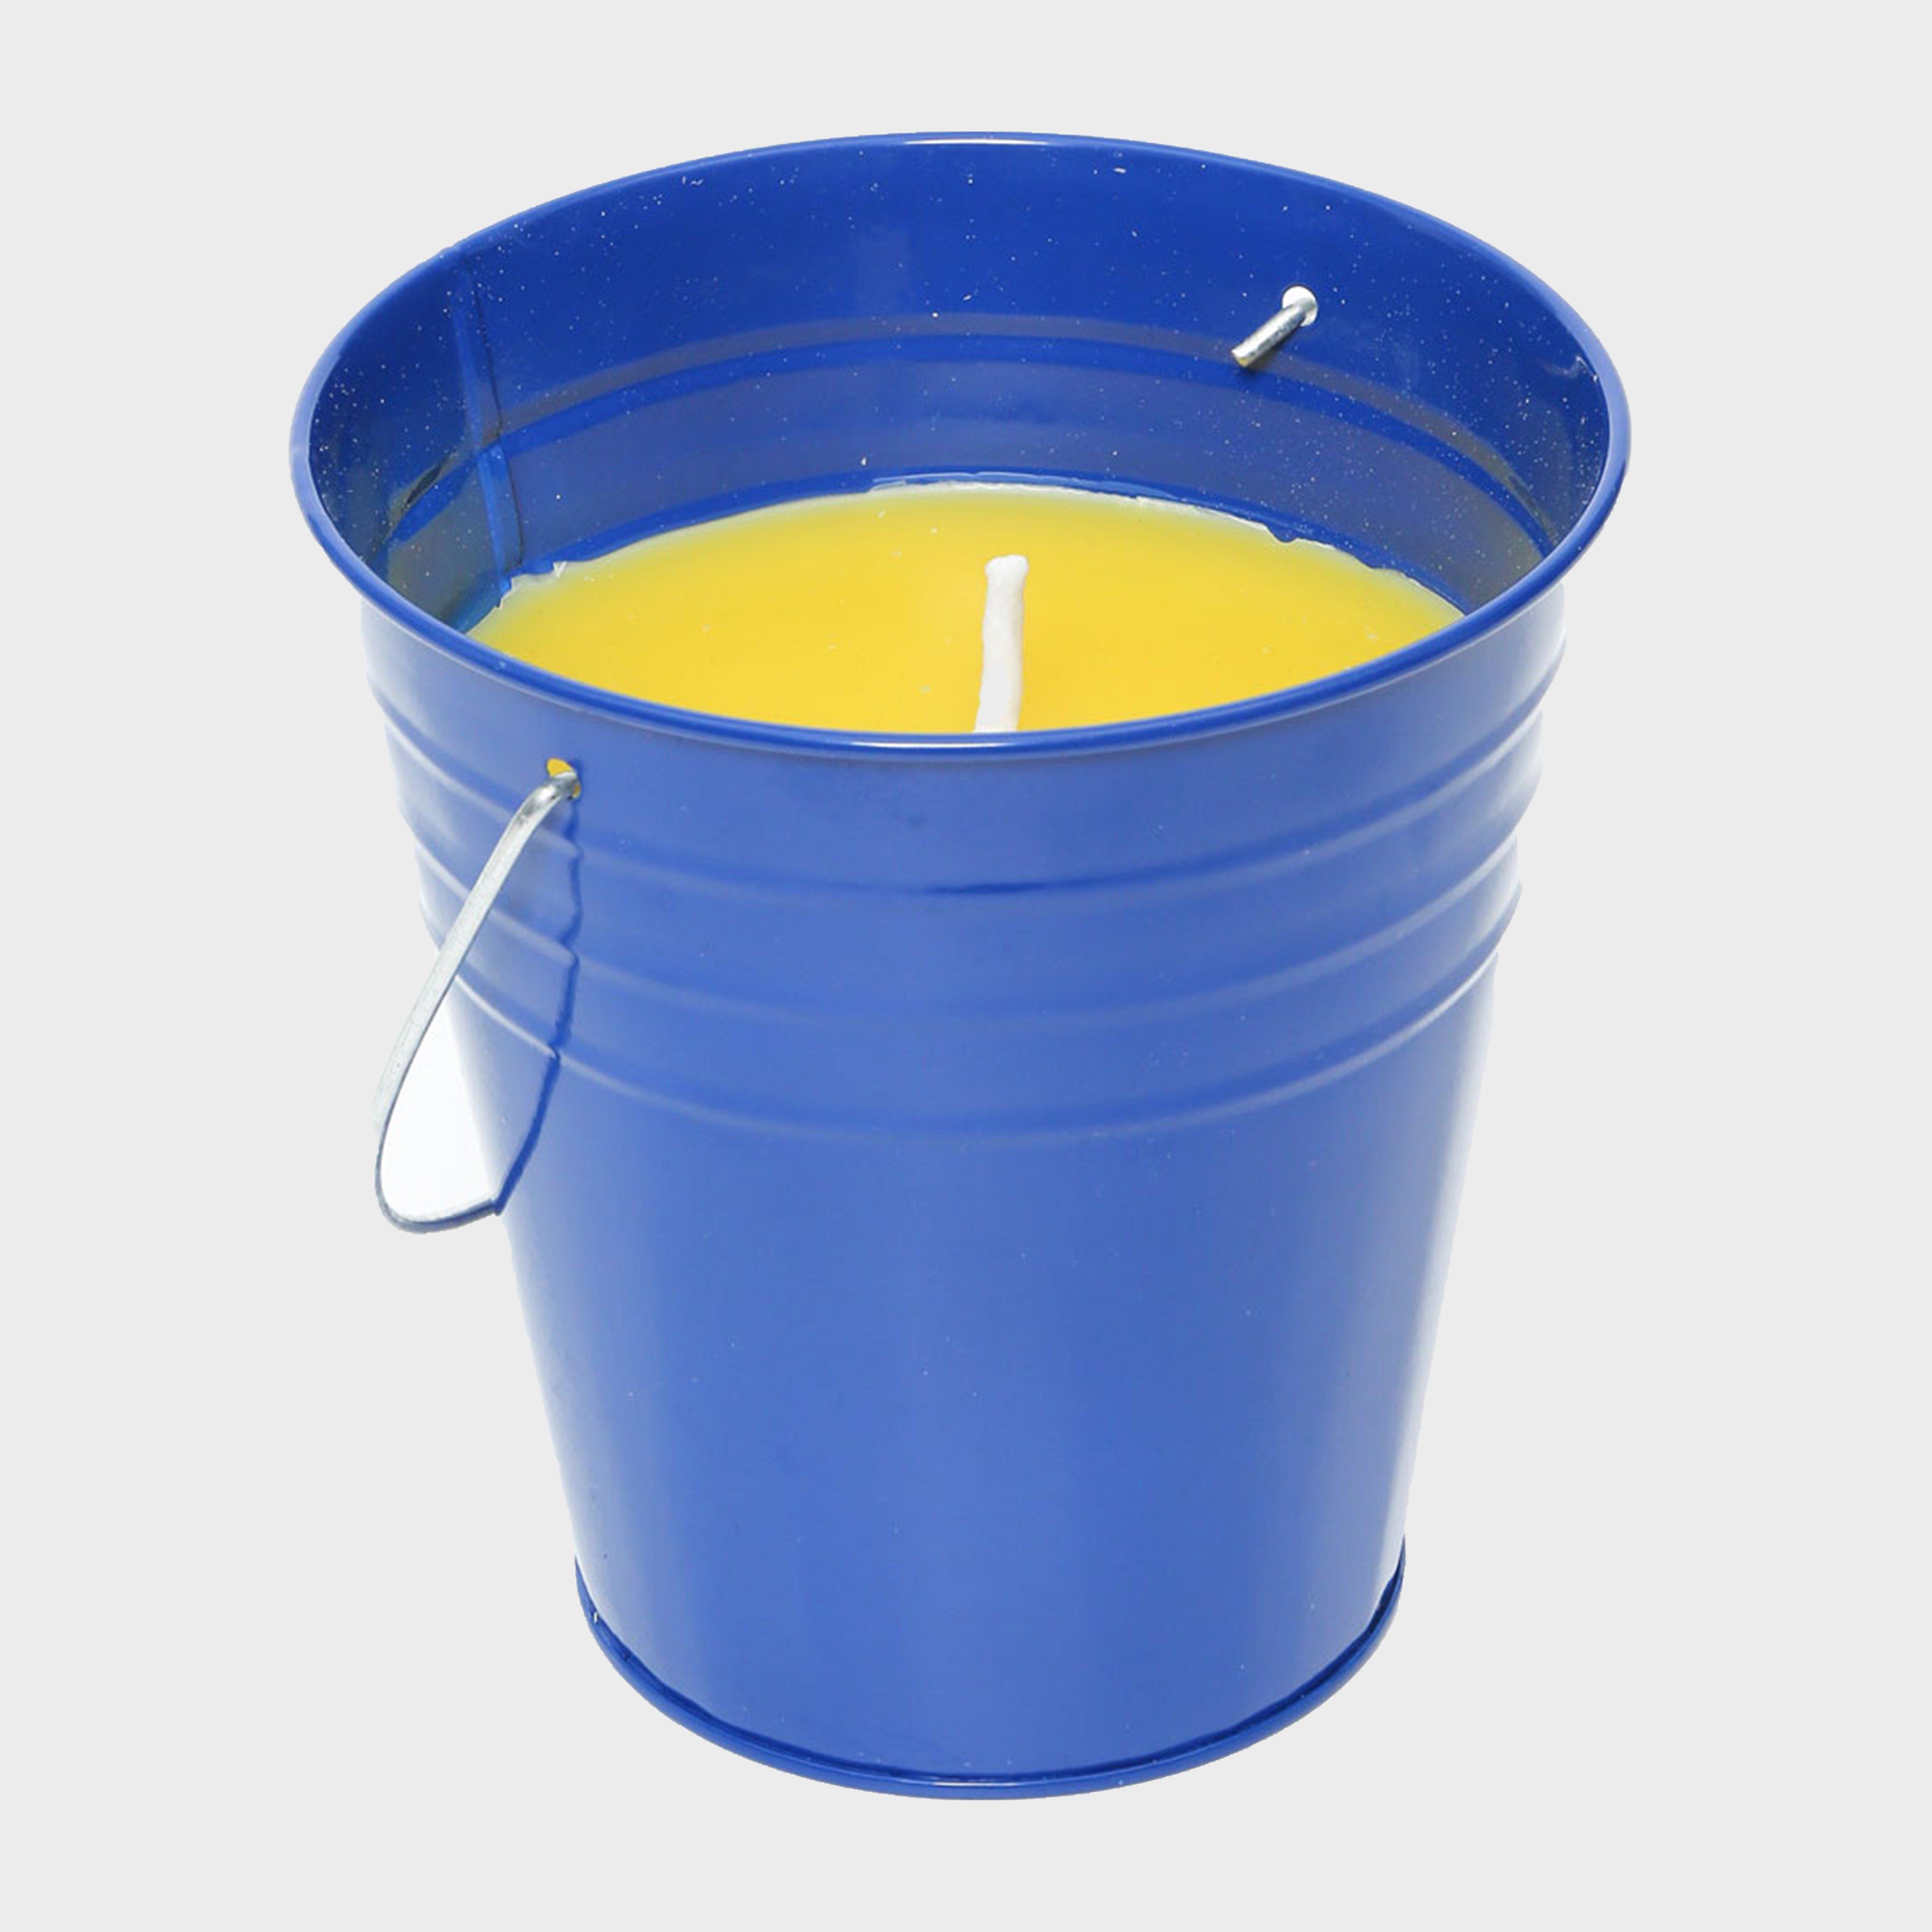 Hi-gear Citronella Bucket Candle - Blue/candle  Blue/candle